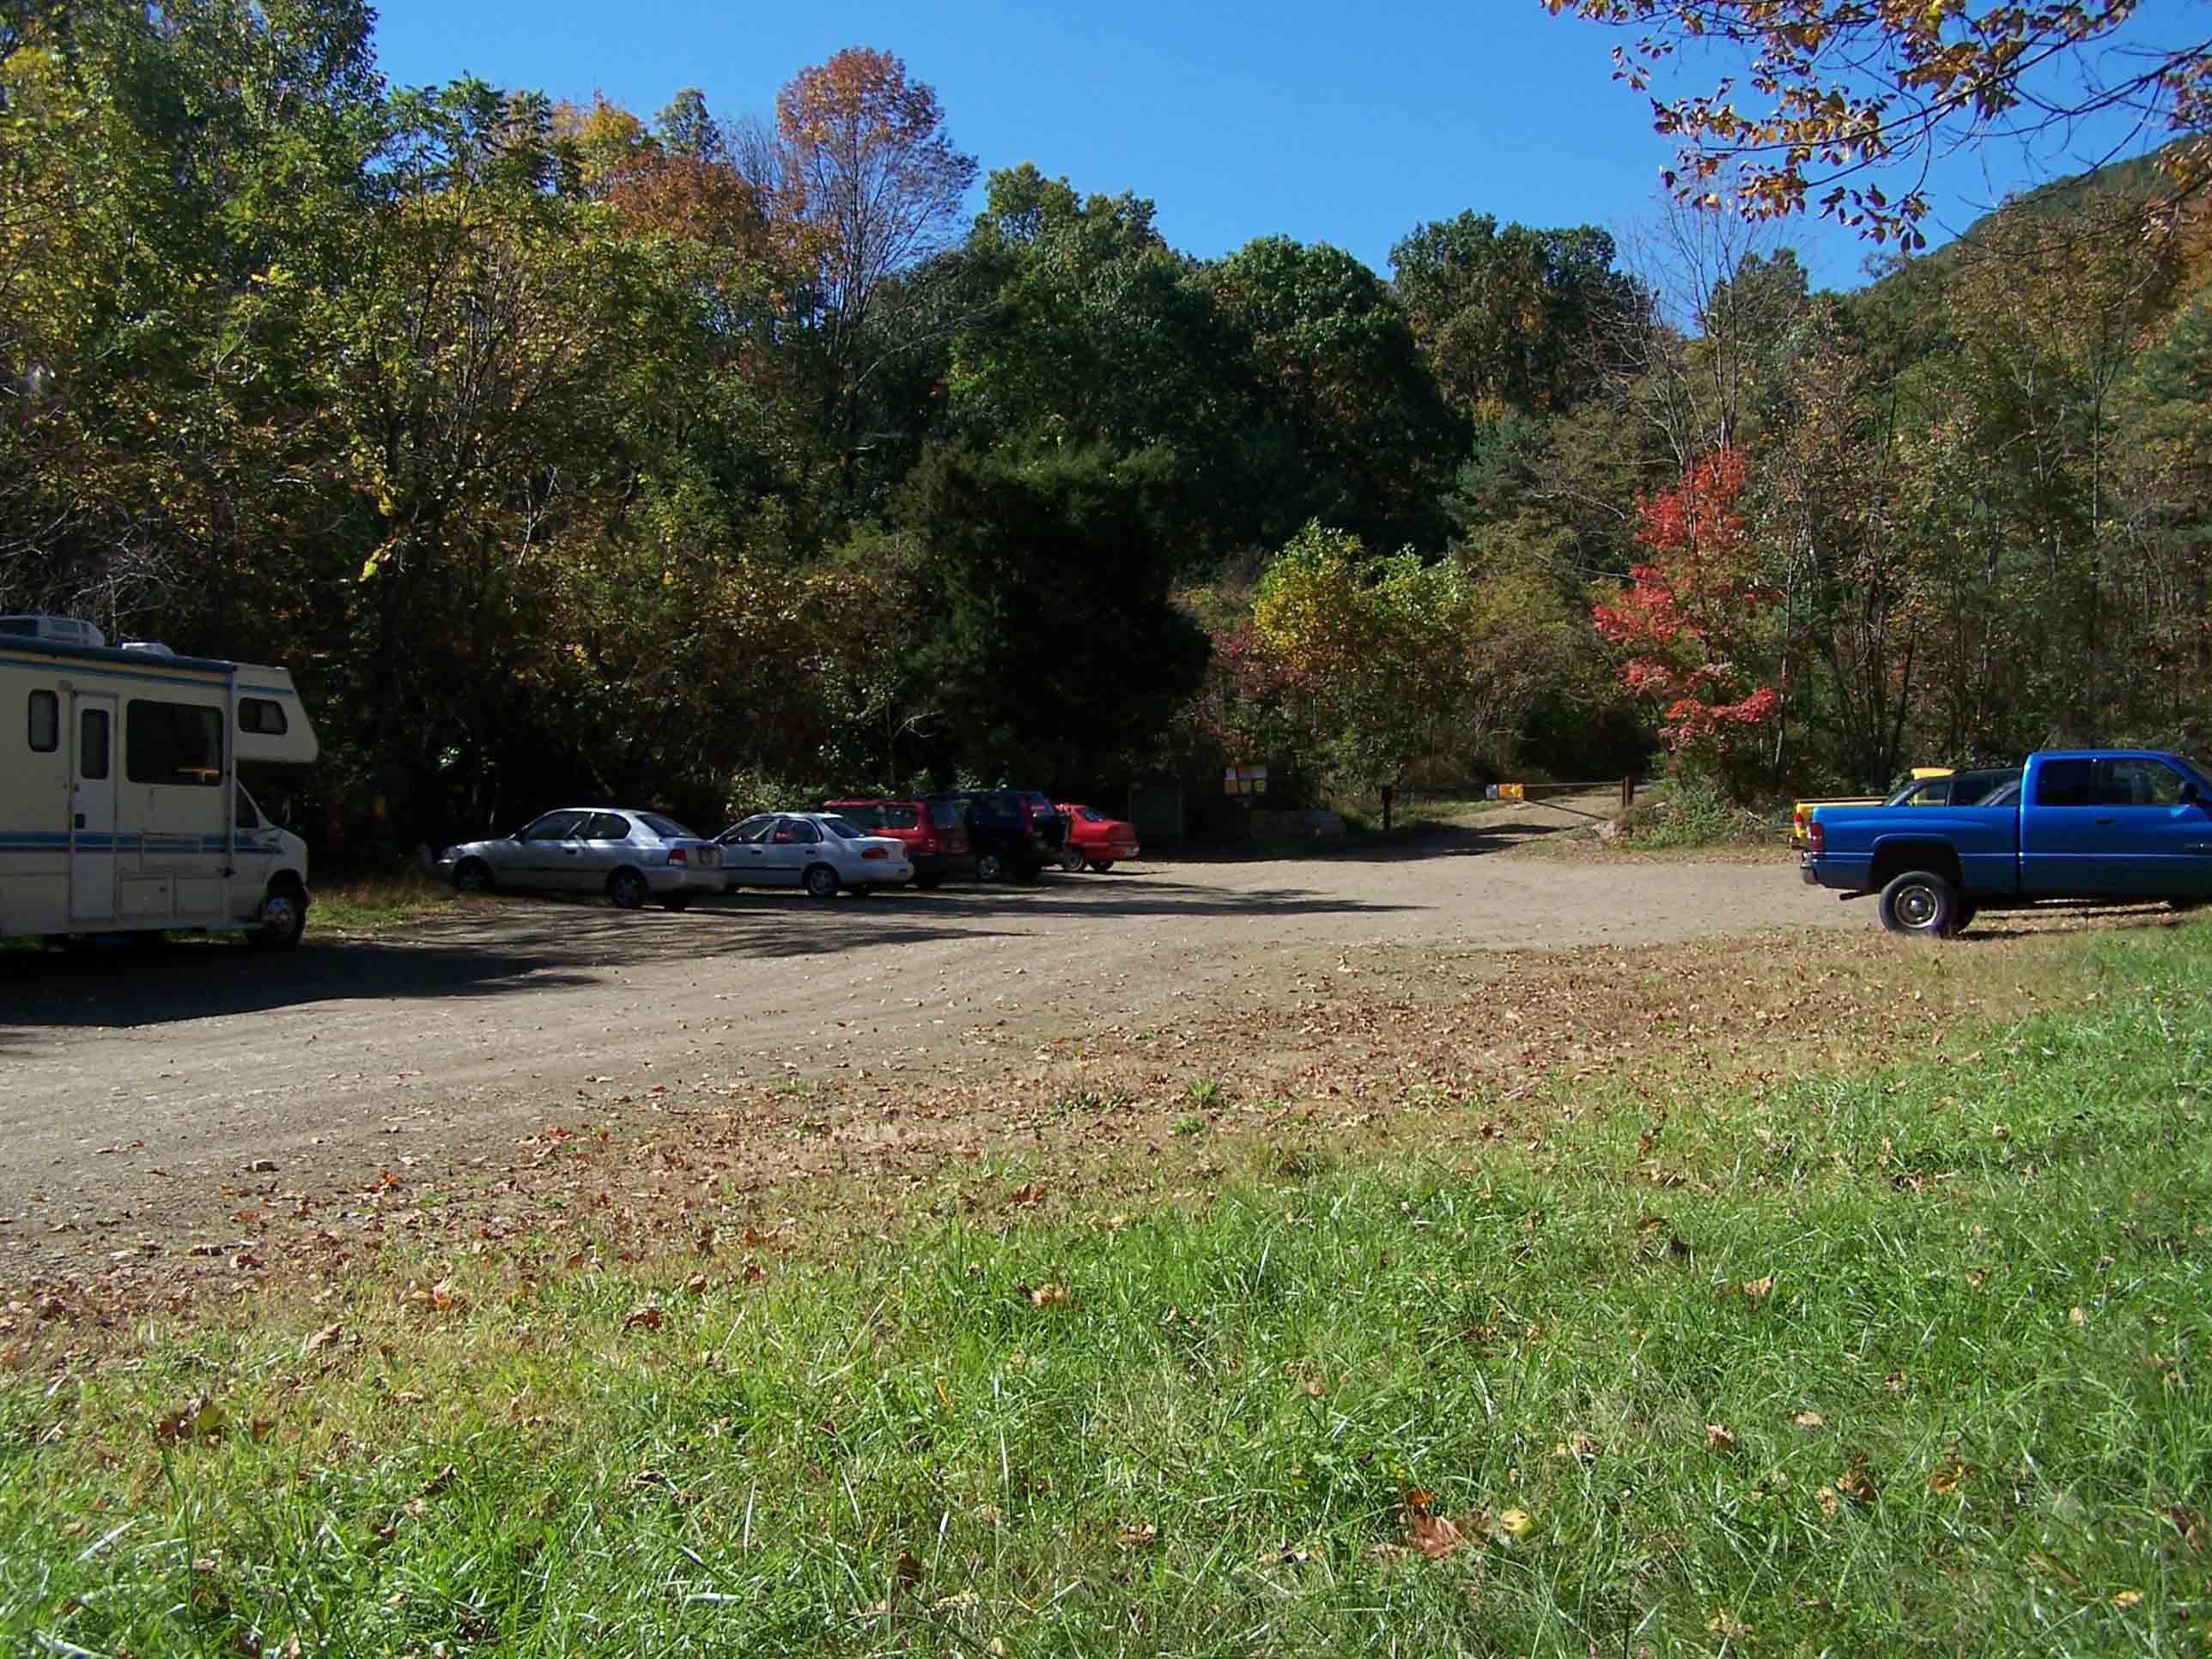 mm 12.4: Parking at the Eckville gamelands parking lot. A blue-blazed trail leads 0.4 miles from this parking lot to the AT. Courtesy at@rohland.org